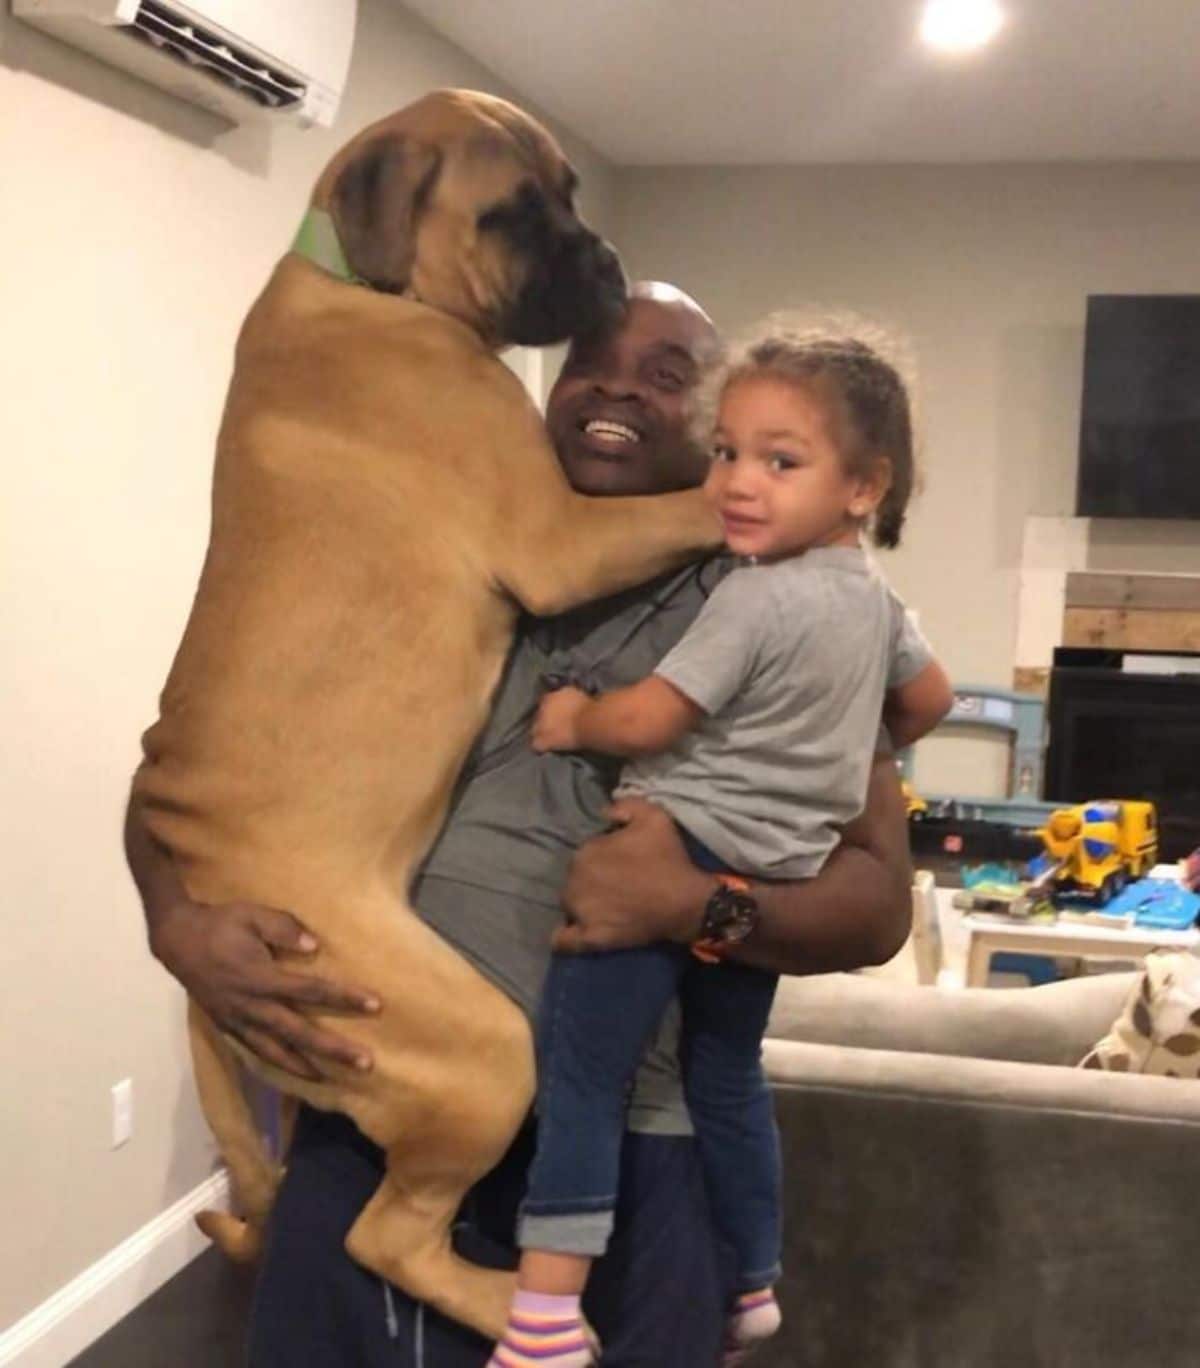 man carrying a large brown dog on his right and a little girl on his left